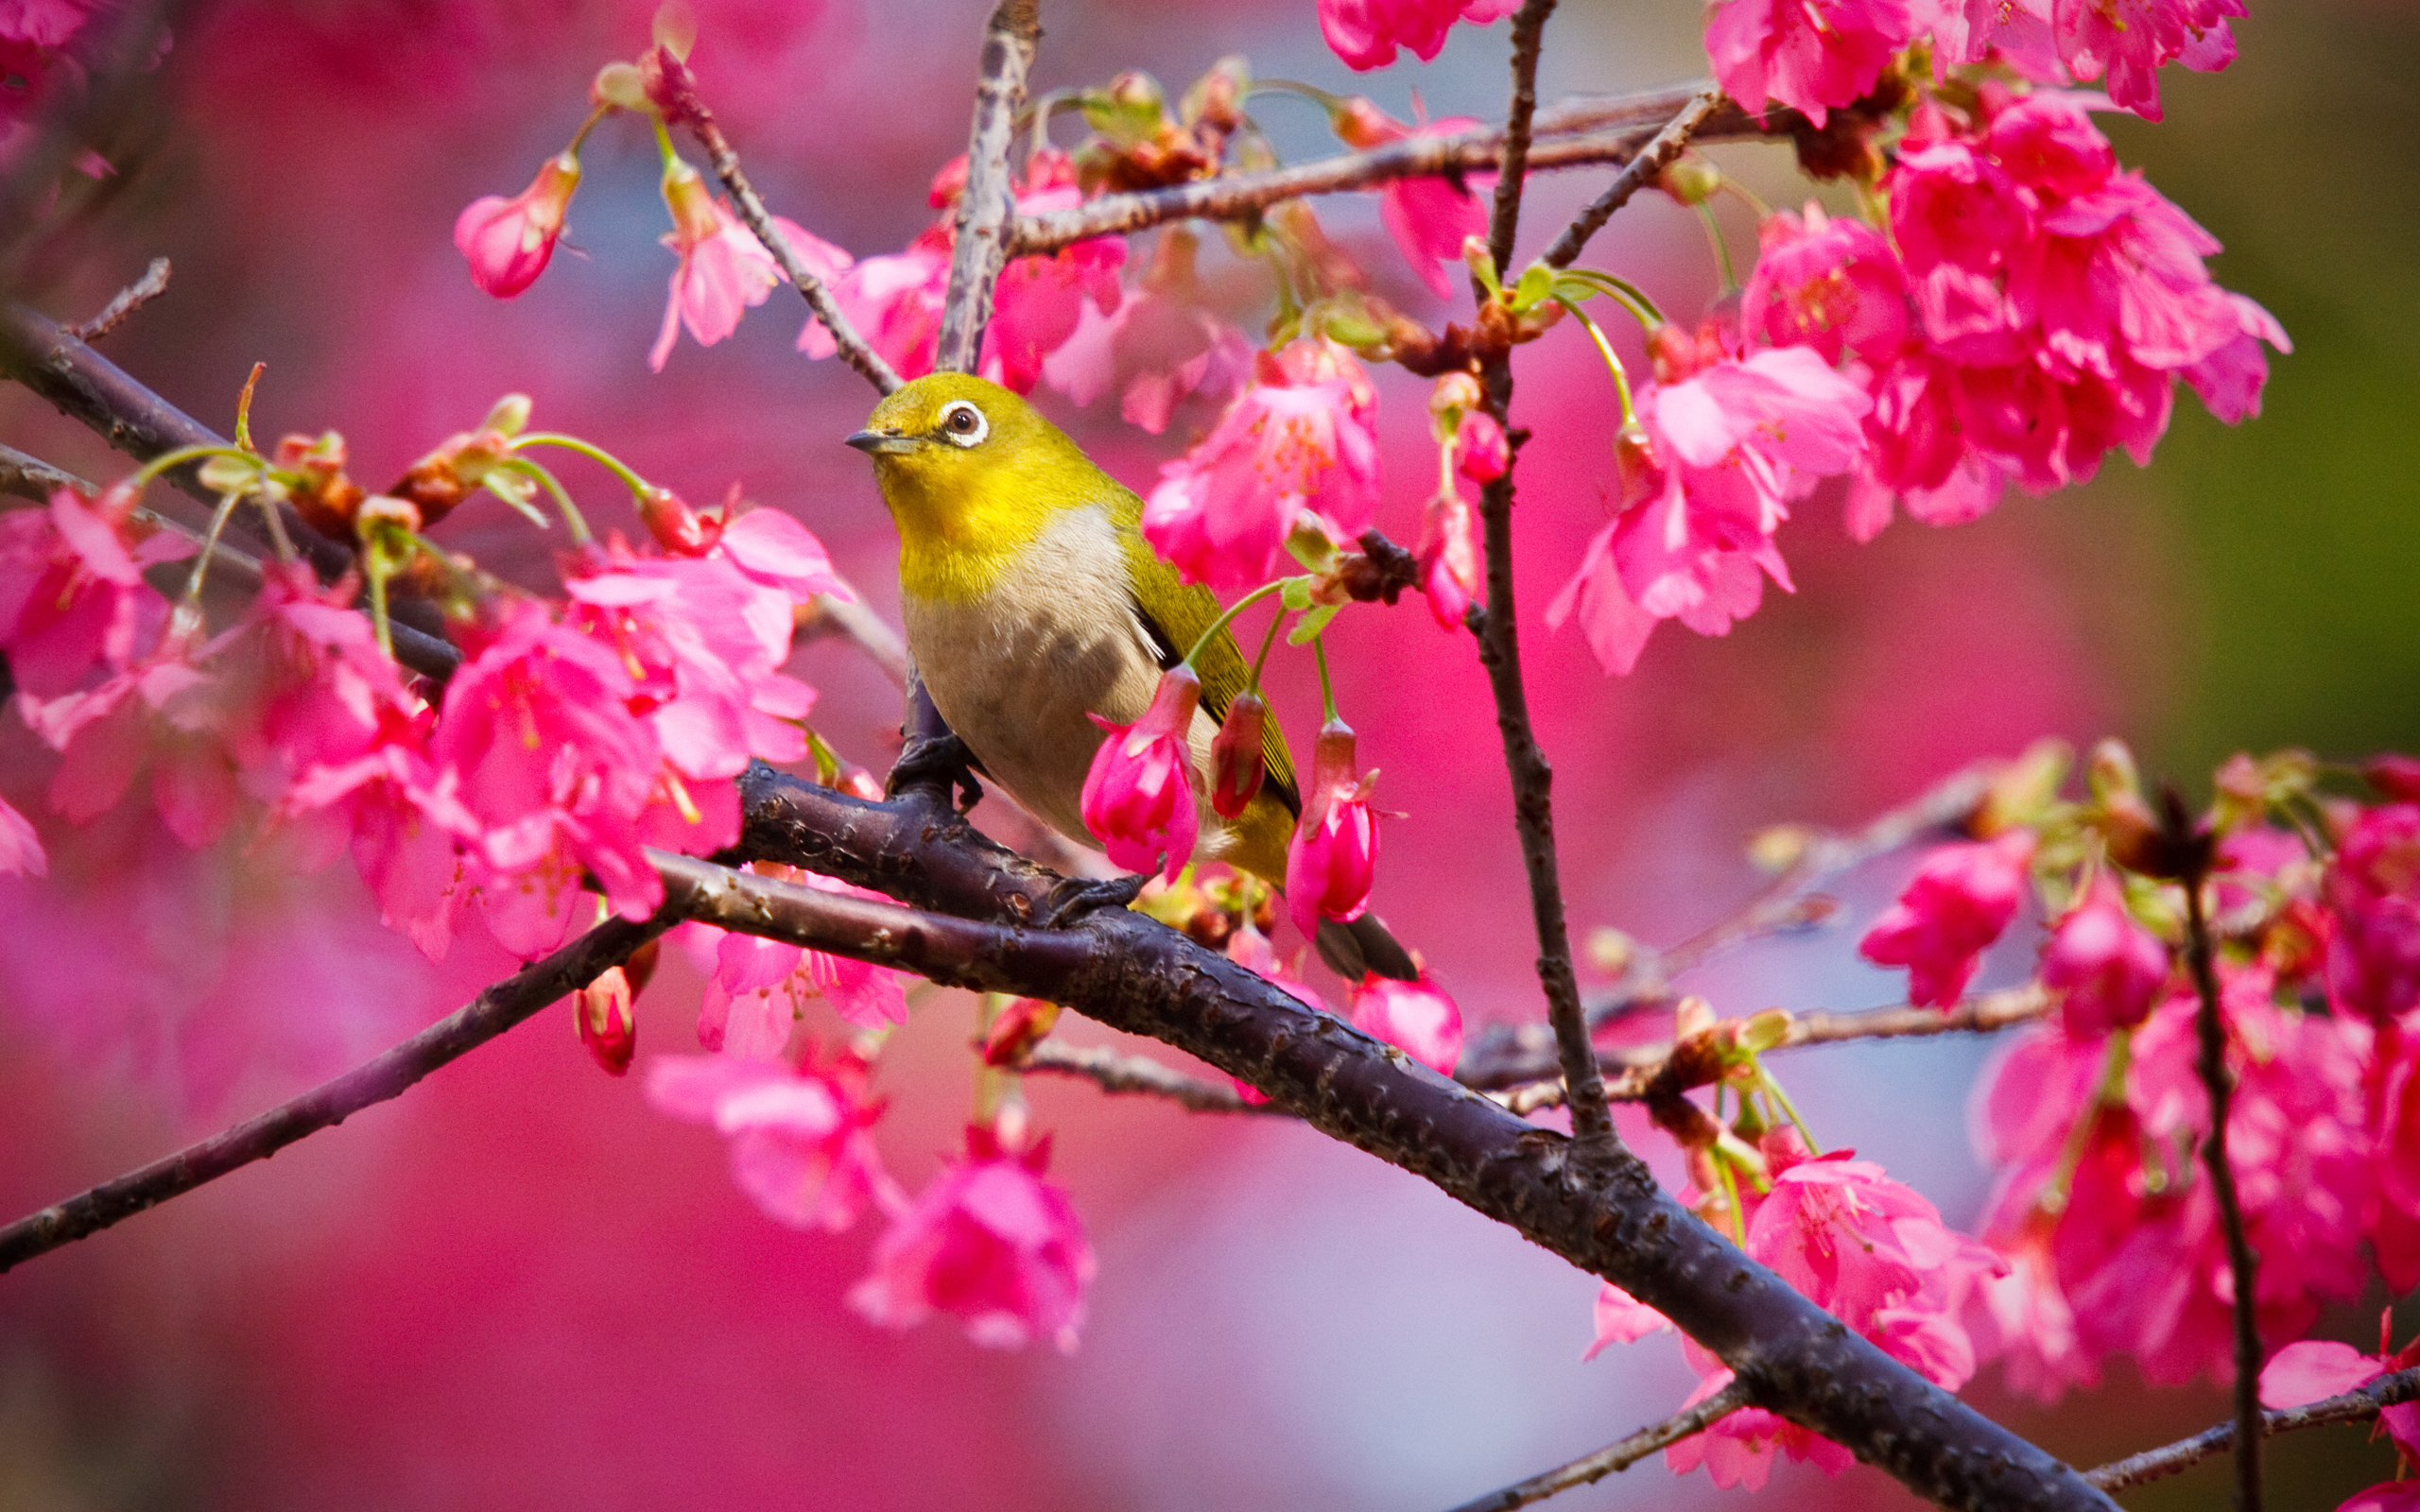 Pretty Wallppaer Of Animals A Small Yellow Bird On The Branch Rose